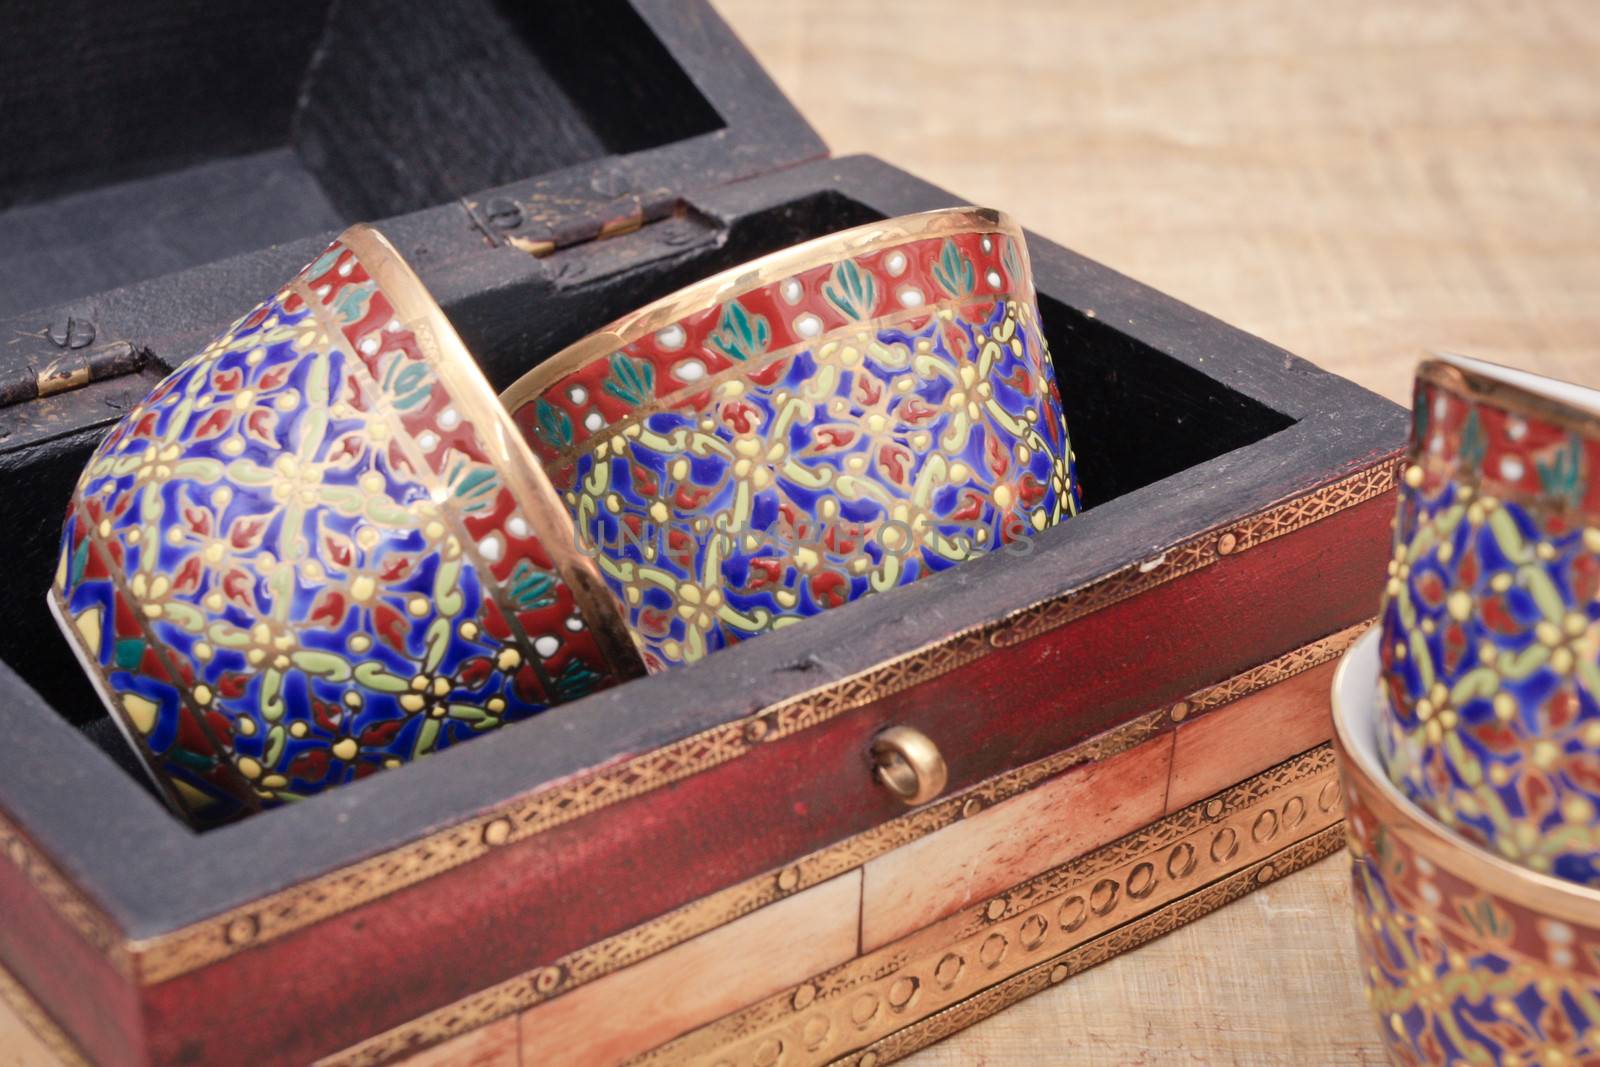 Traditional middle eastern tea cups in a wooden box